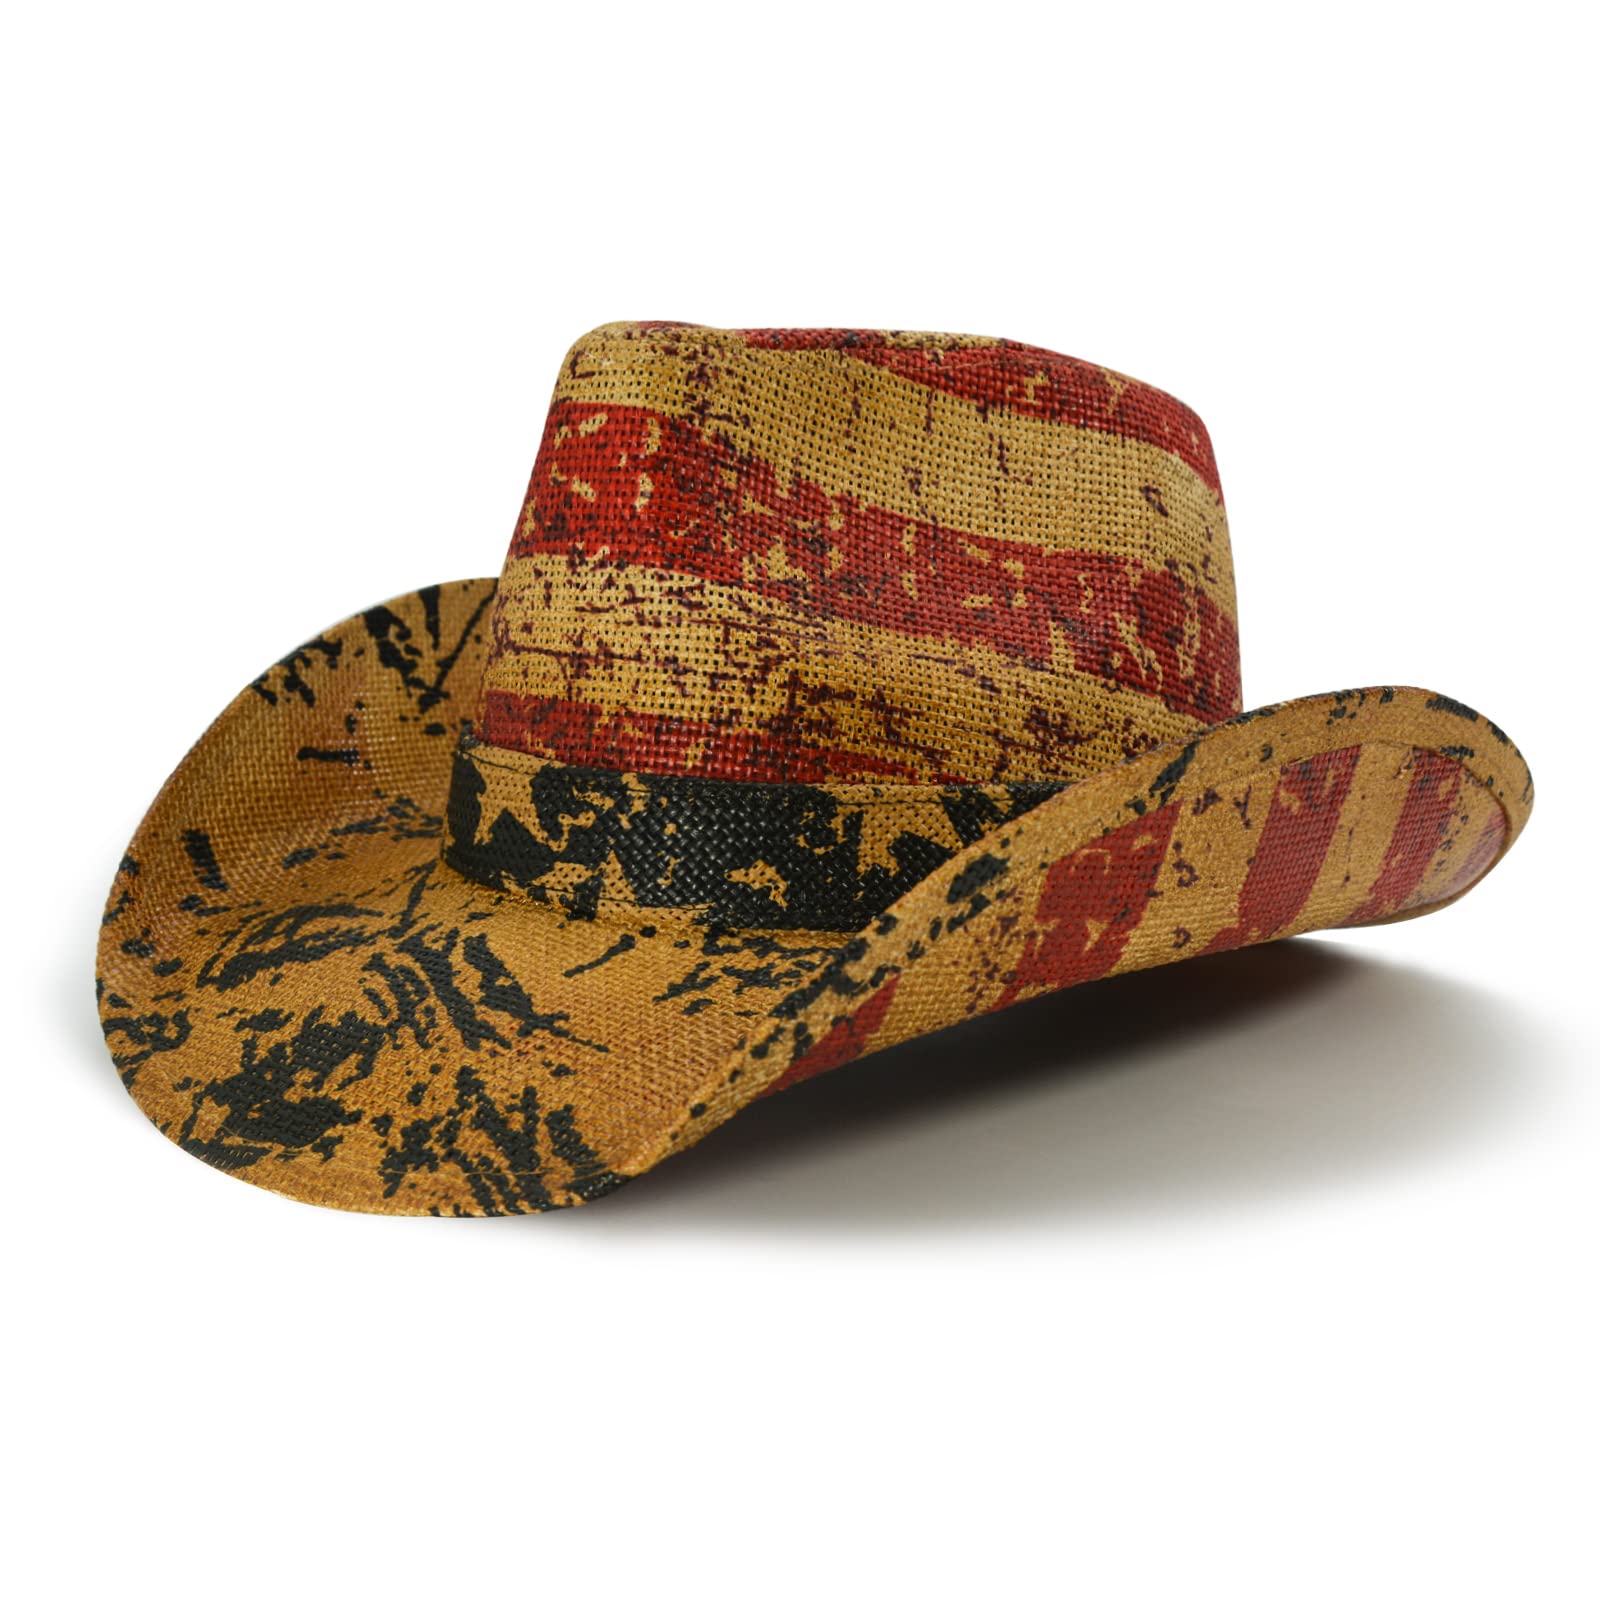 Classic country Hat